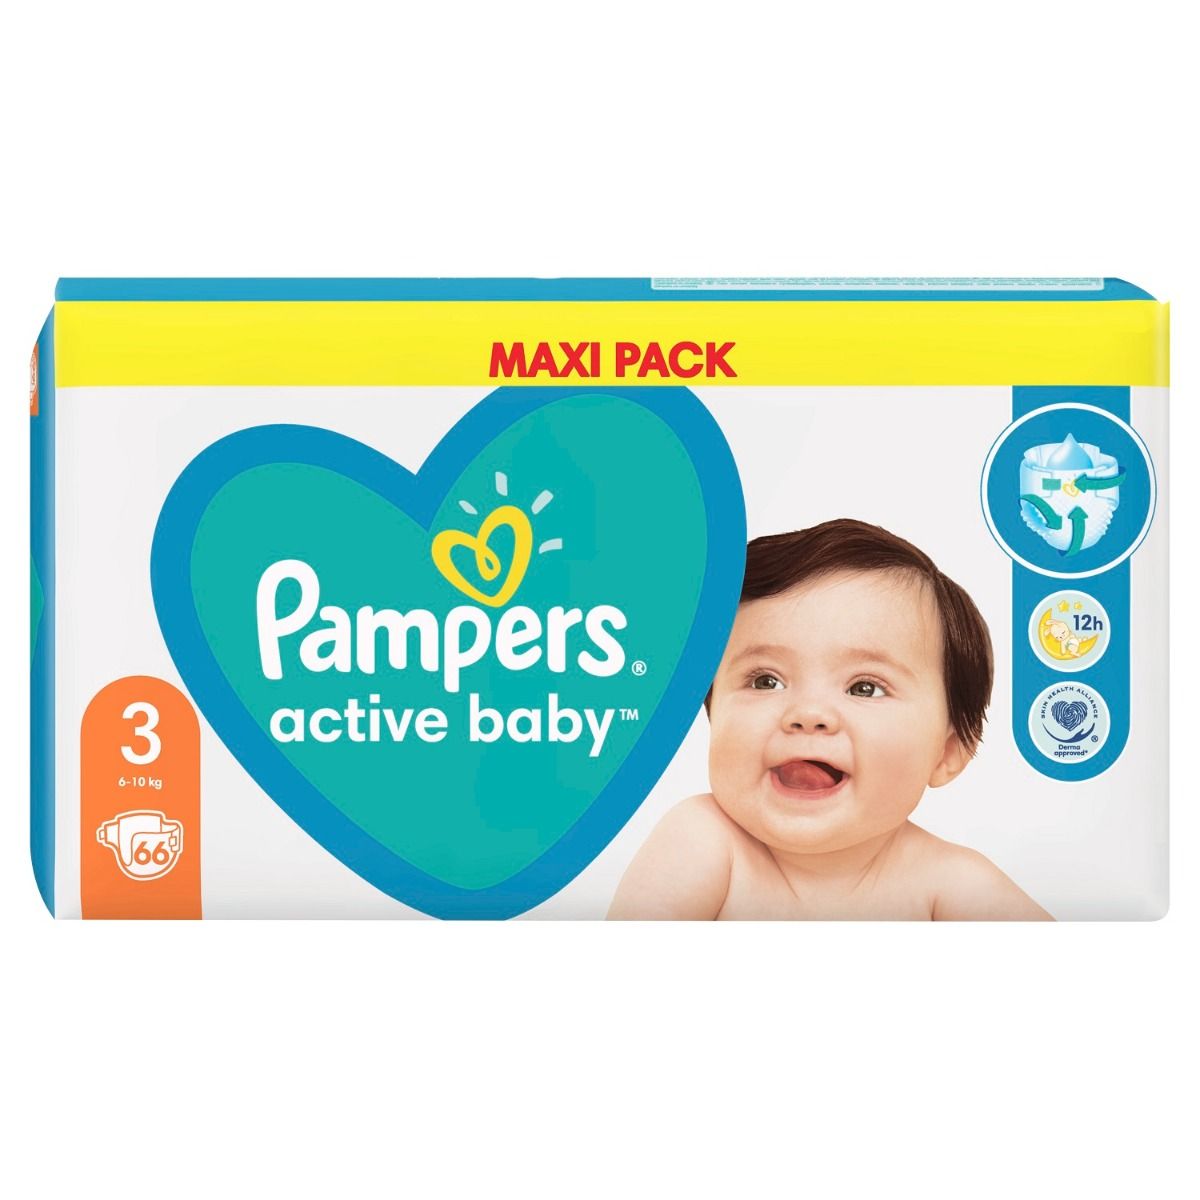 epson pampers reset